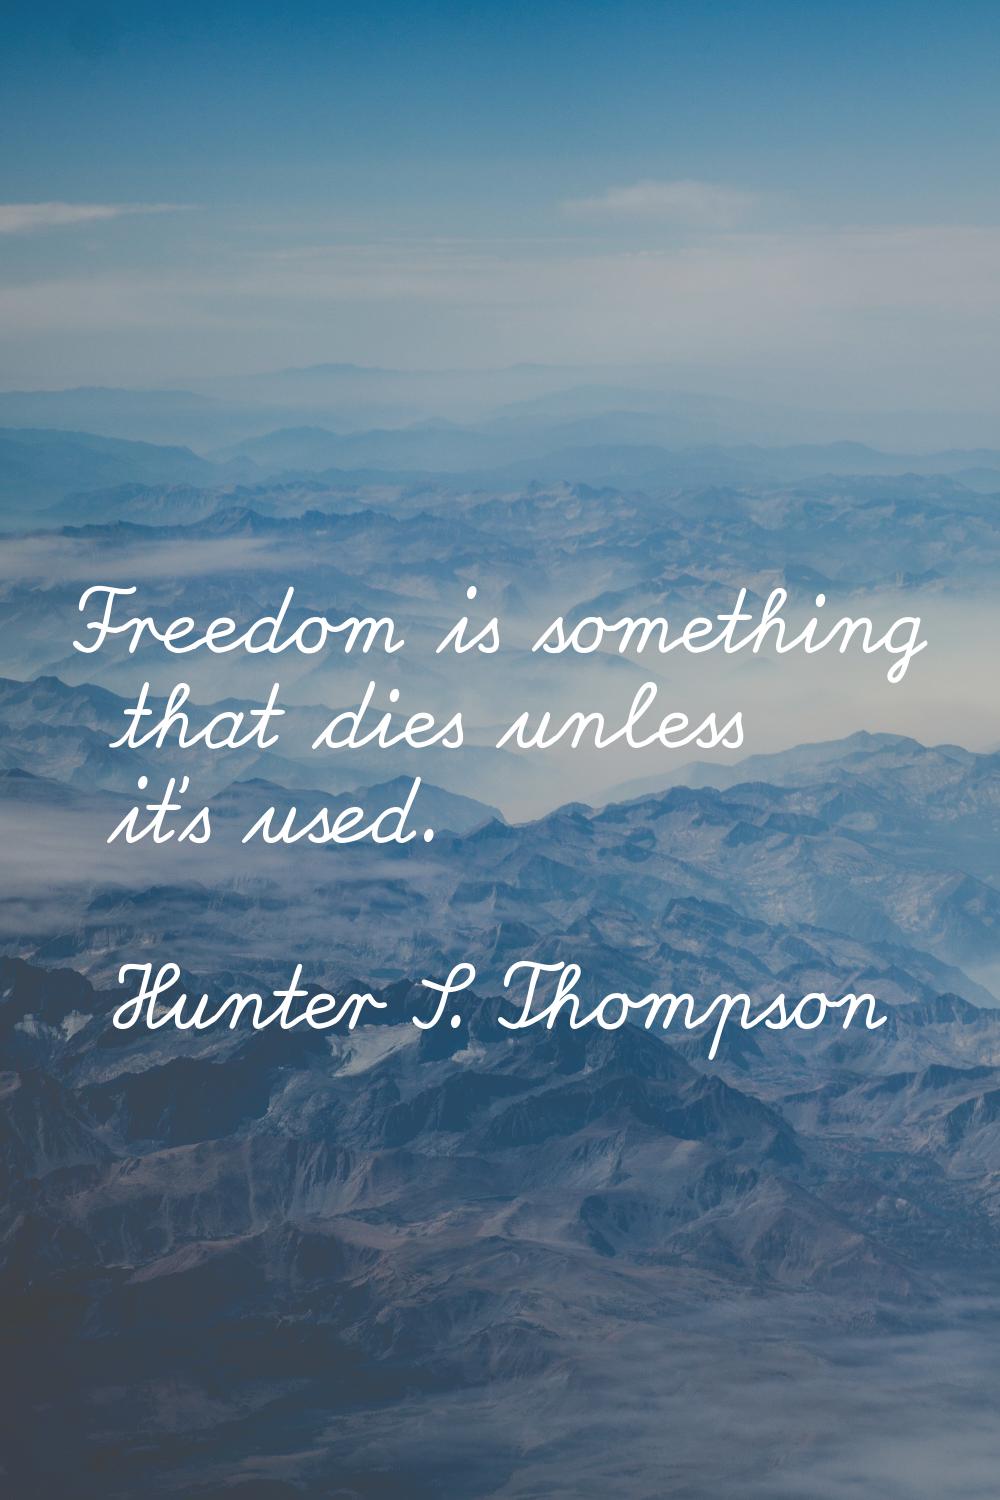 Freedom is something that dies unless it's used.